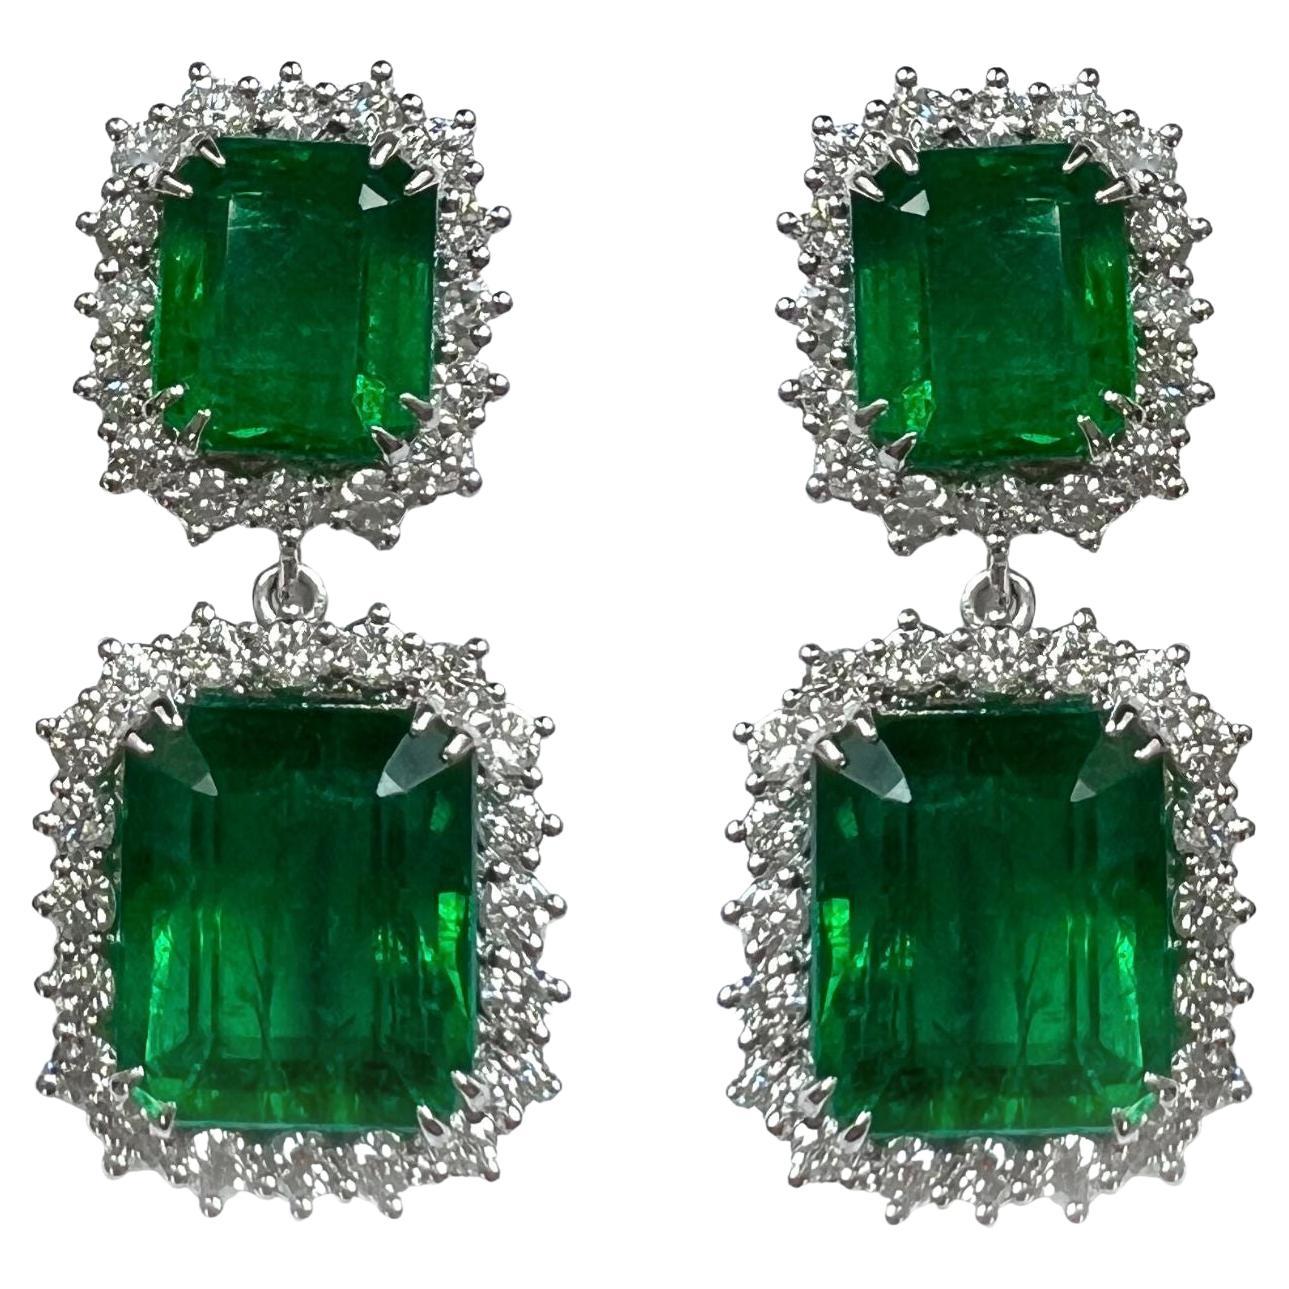 20 Carat Emerald Dangle Earrings With 2.5 Carat Halo Diamonds 18K White Gold For Sale